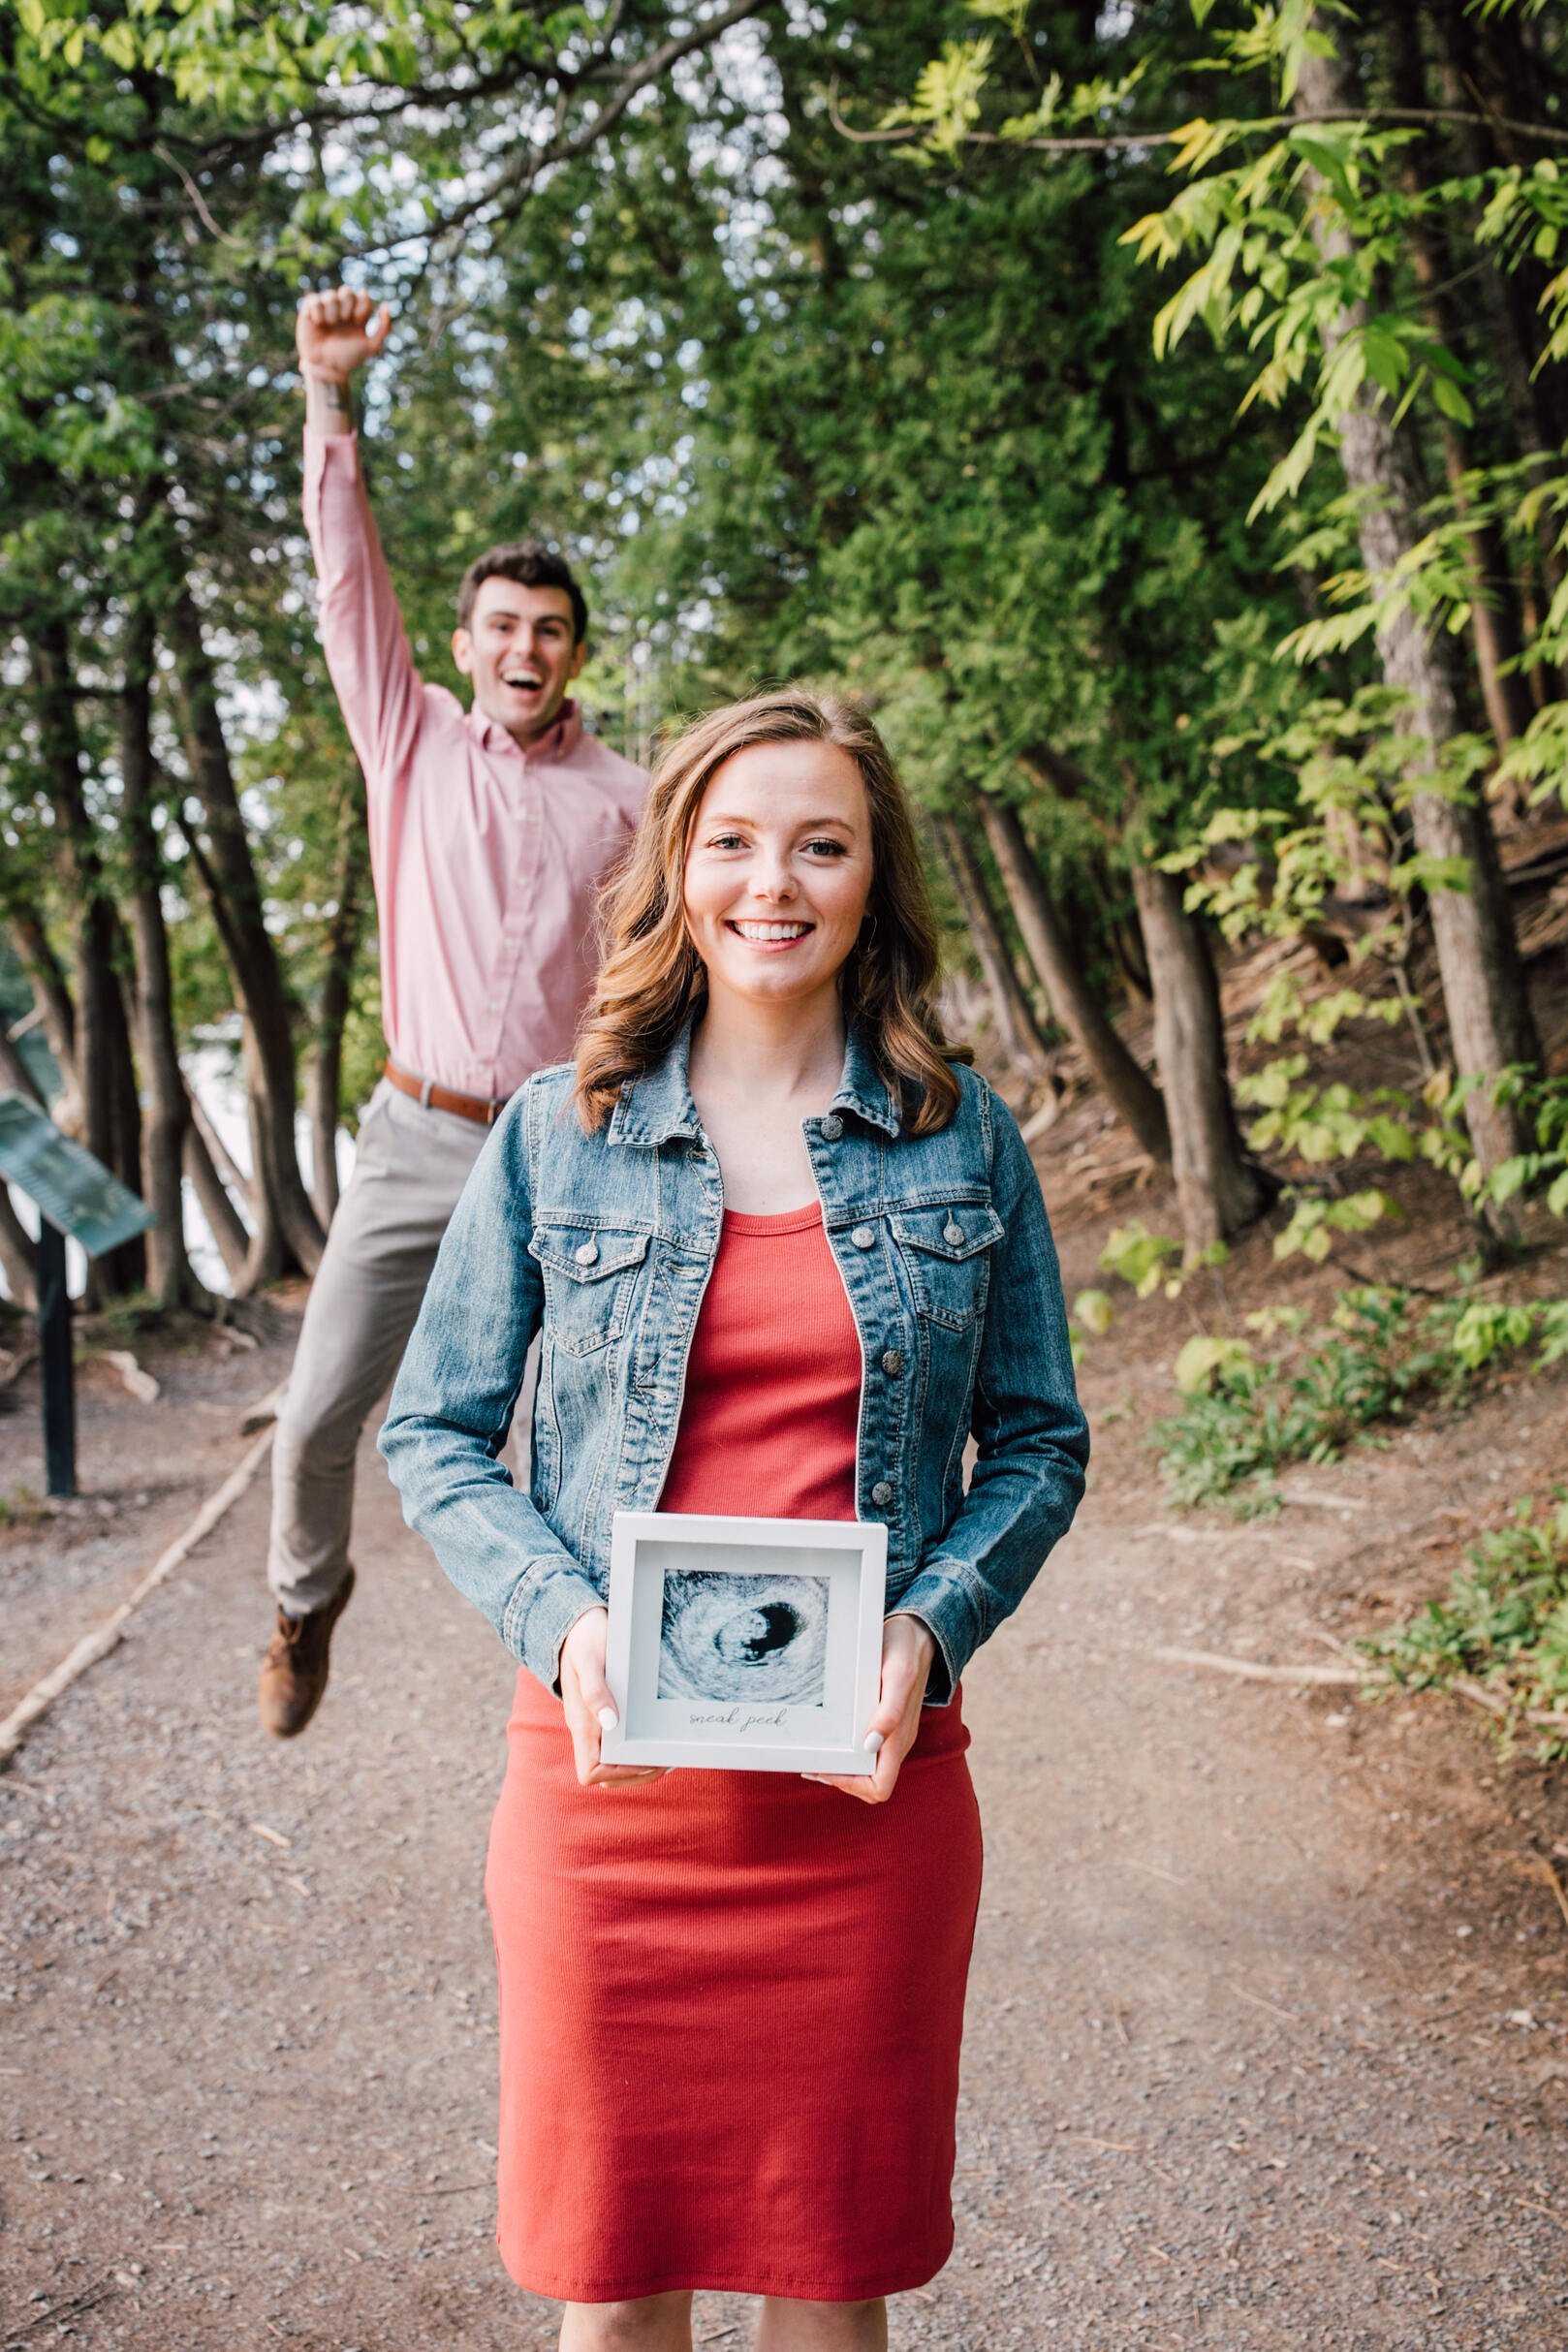  Pregnancy announcement ideas dad to be jumps out of excitement in the background while mom to be holds ultrasound photo 